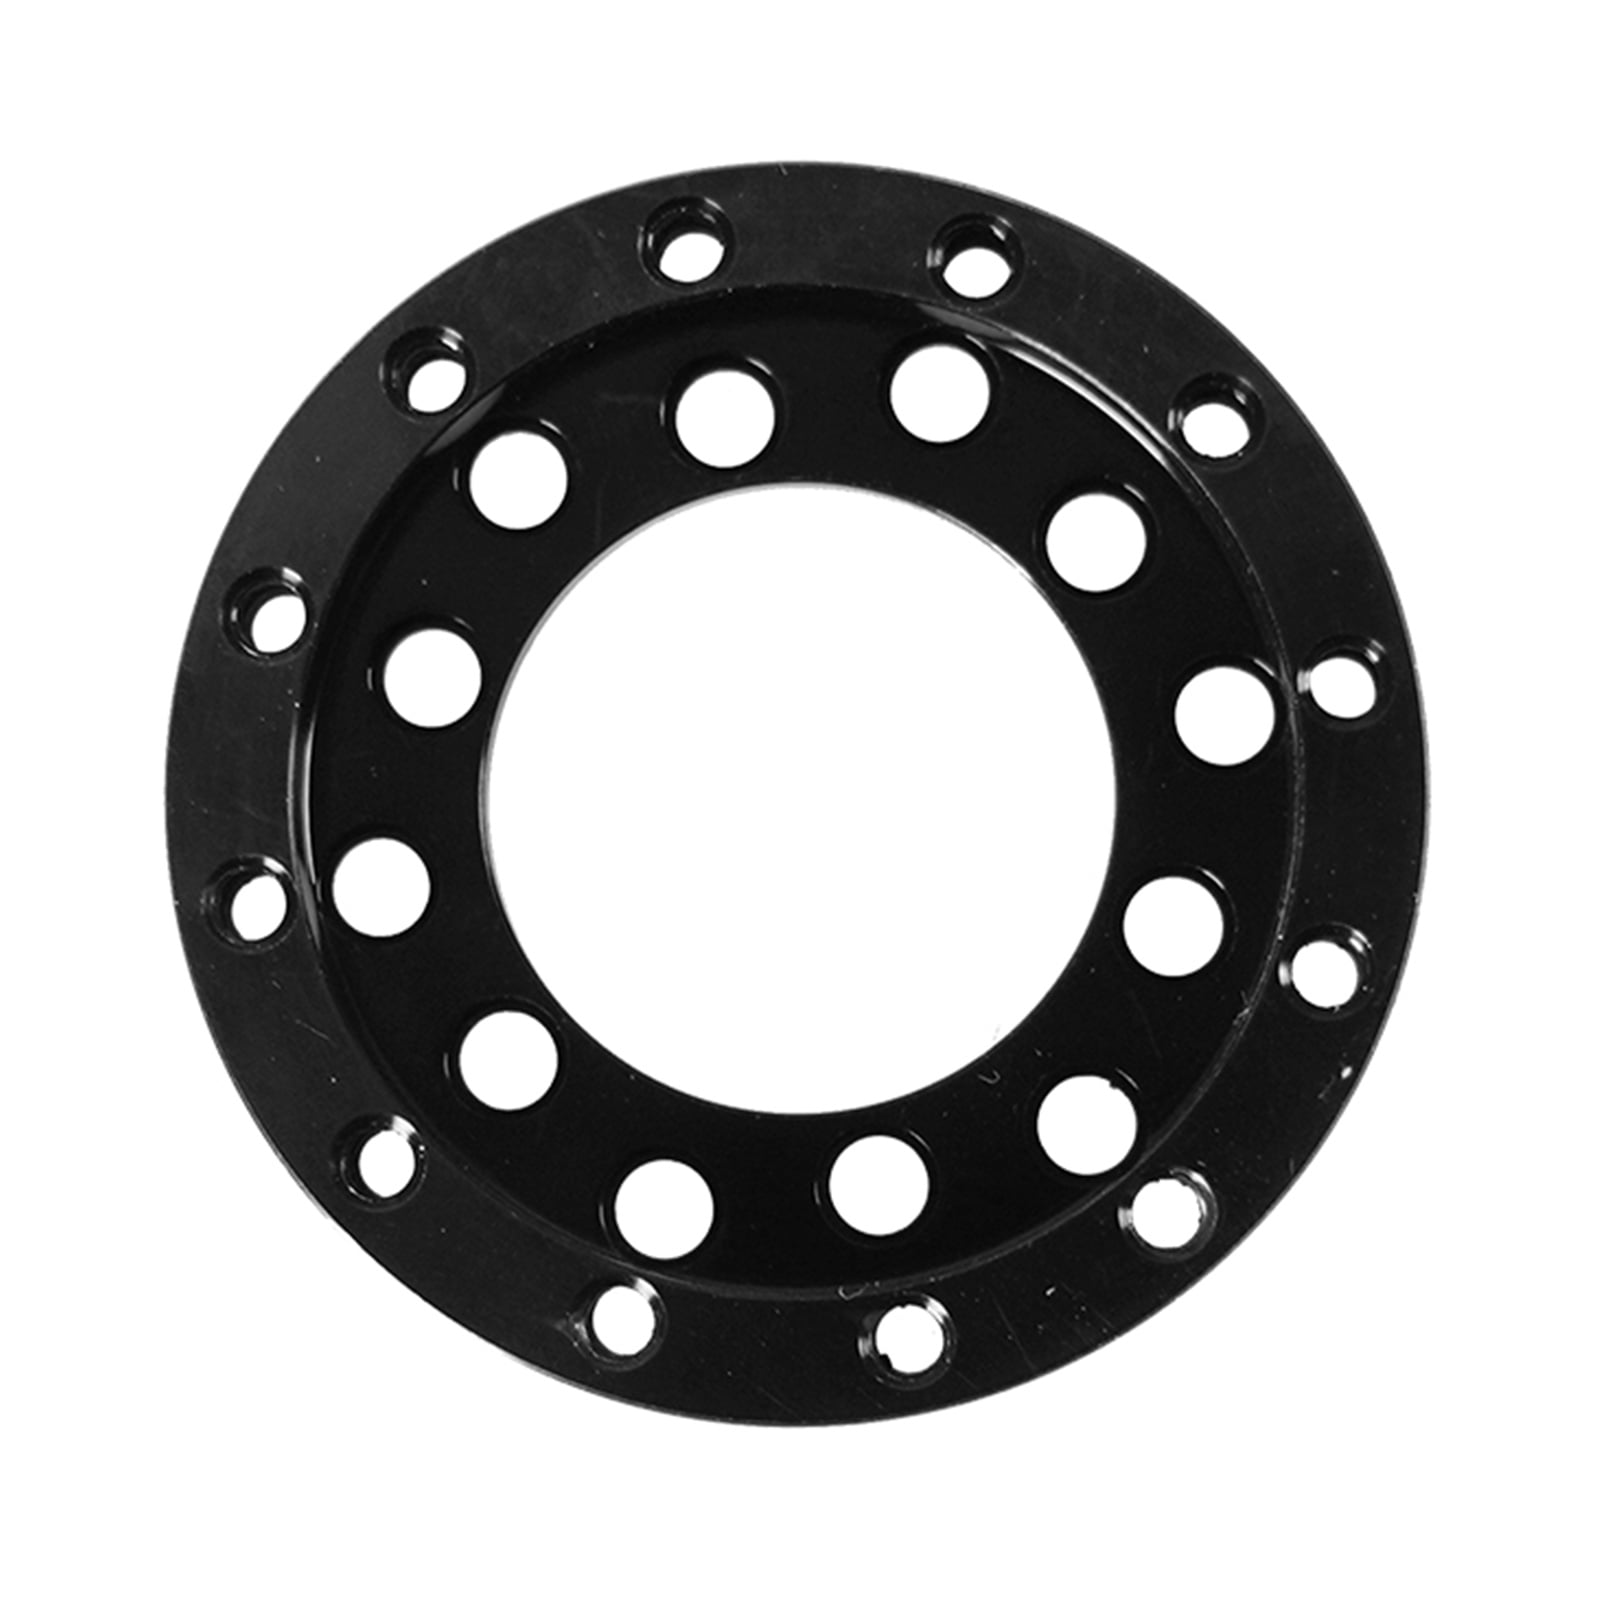 CNSPEED 73mm Steering Wheel Adapter Plate For Logitech G25 G27 Fit to 13  14 Steering Wheels PCD Racing Car Game Modification